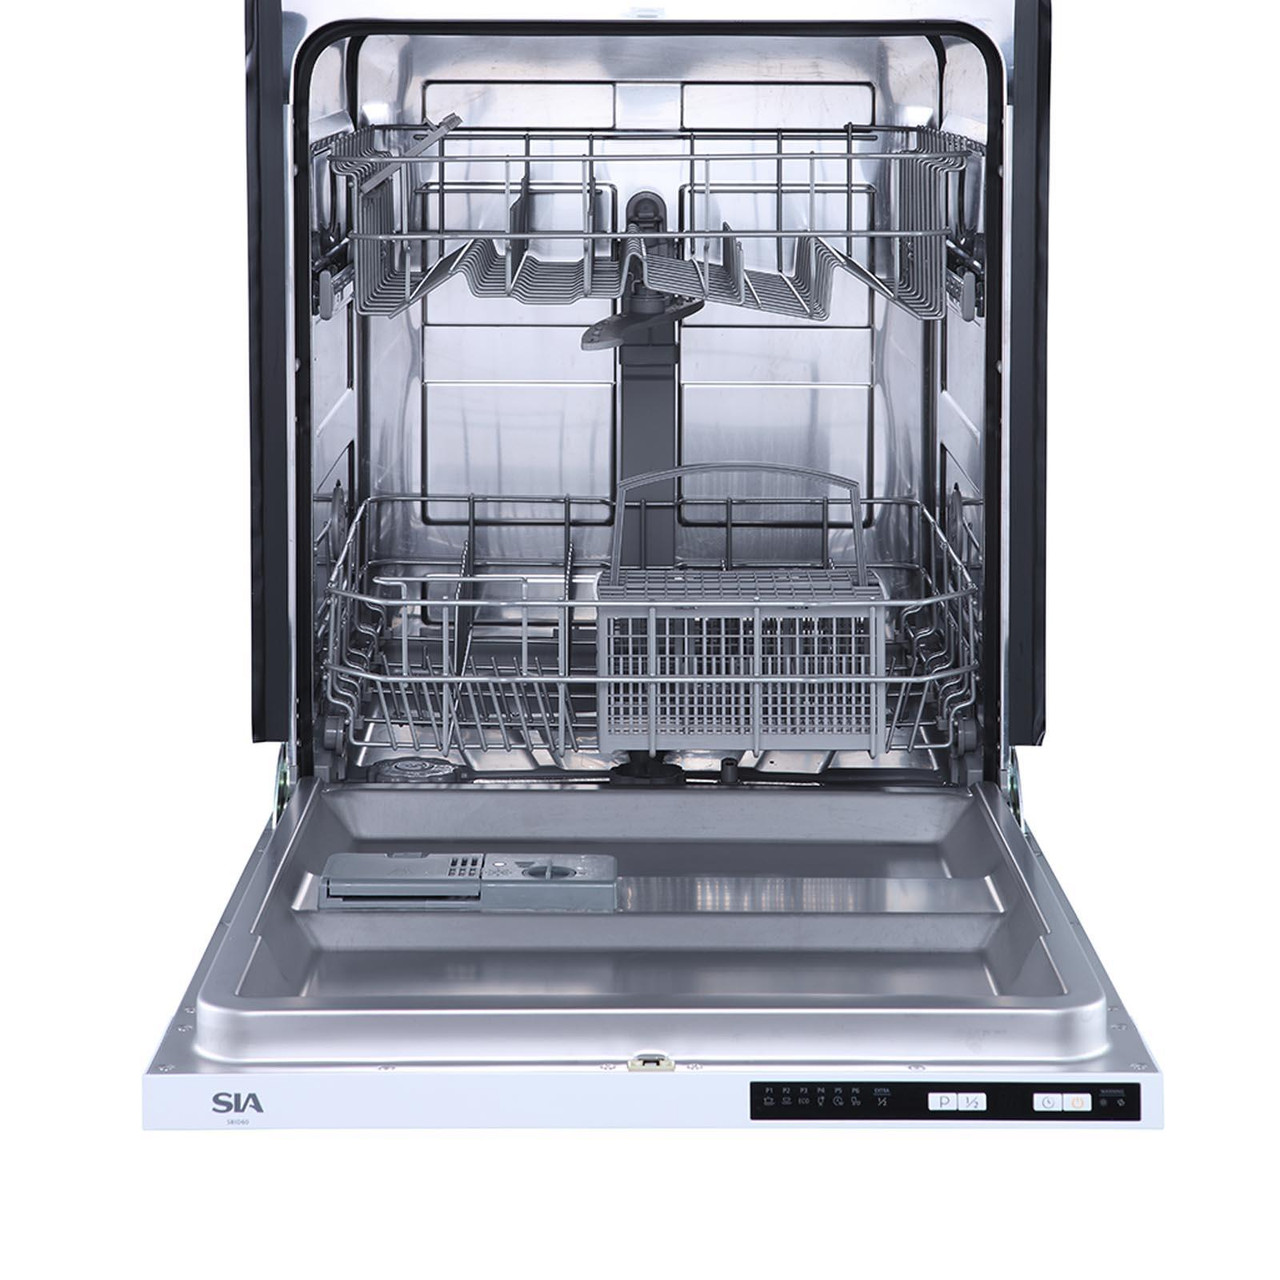 60cm Integrated Dishwasher, 12 Place Settings - SIA SBID60